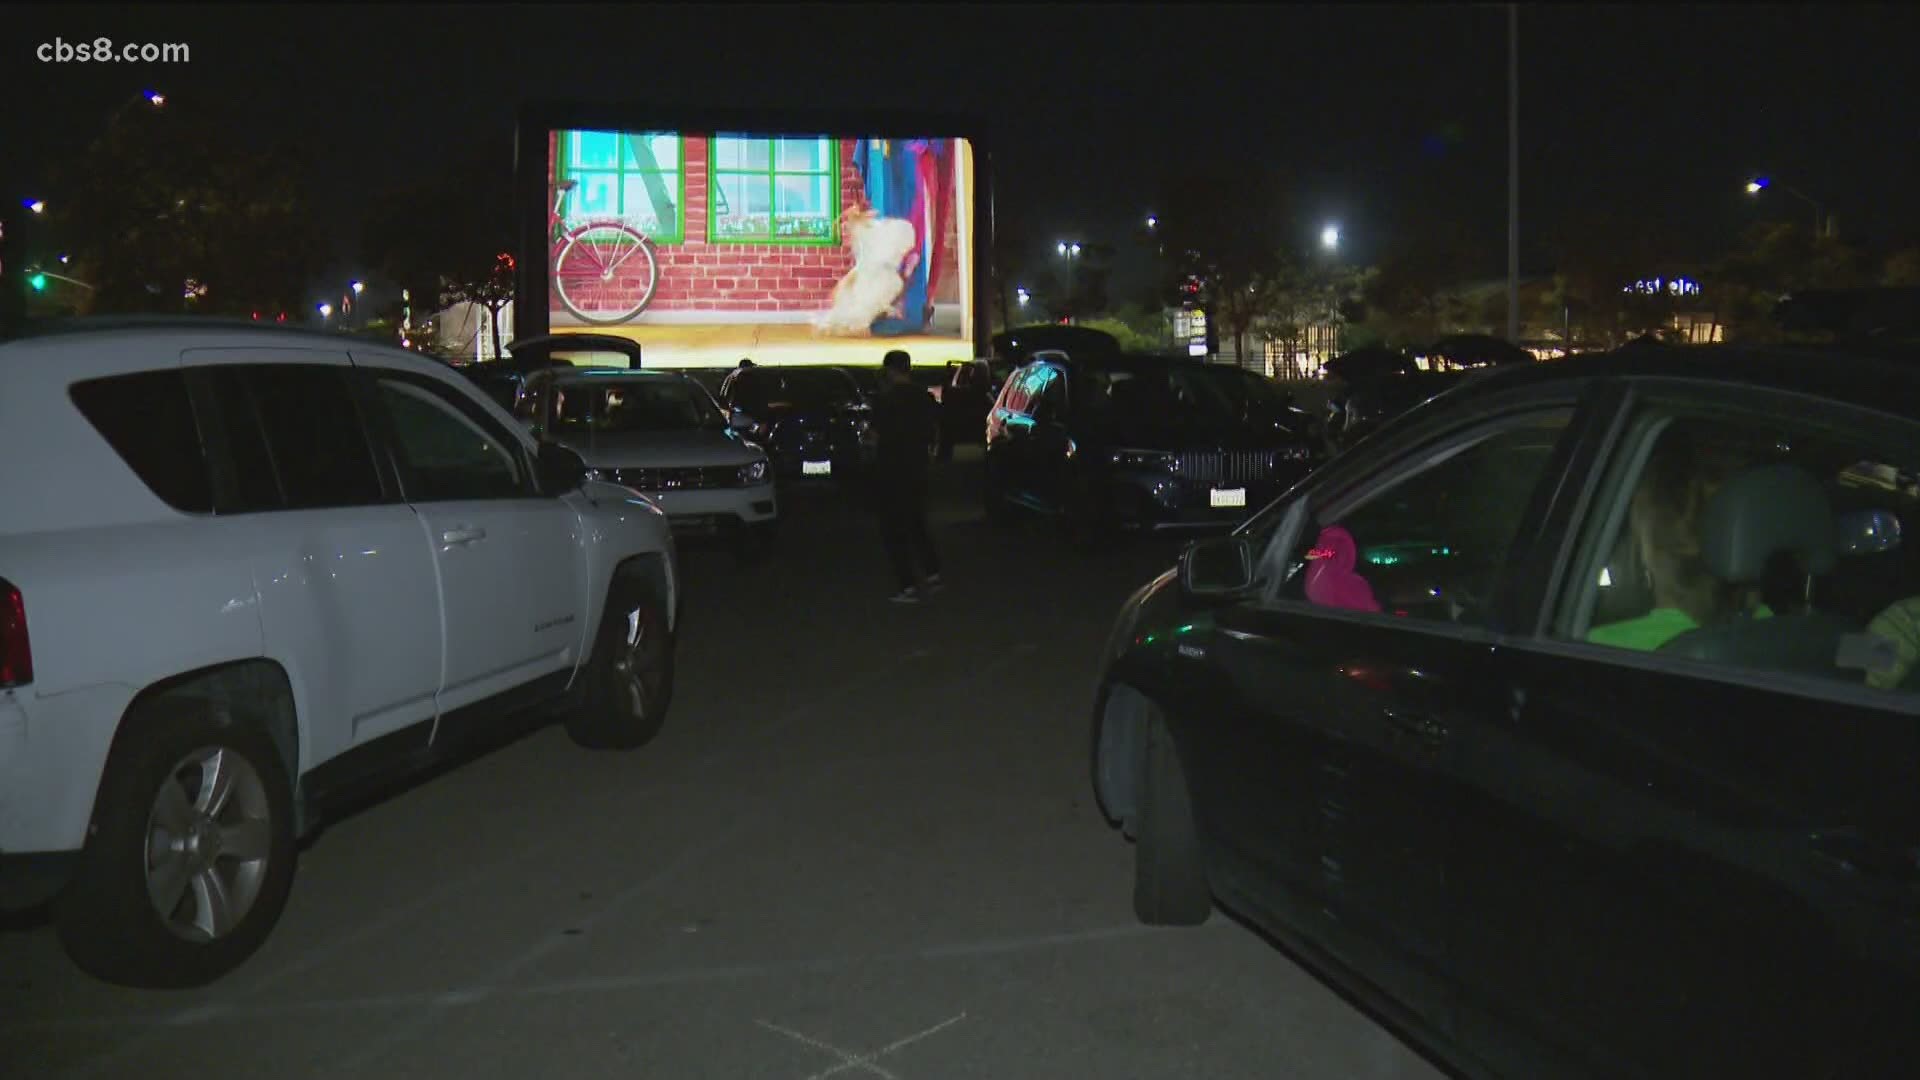 The Mission Valley Mall parking lot is transforming into a drive-in outdoor theater for the weekend to raise funds for Feeding San Diego.